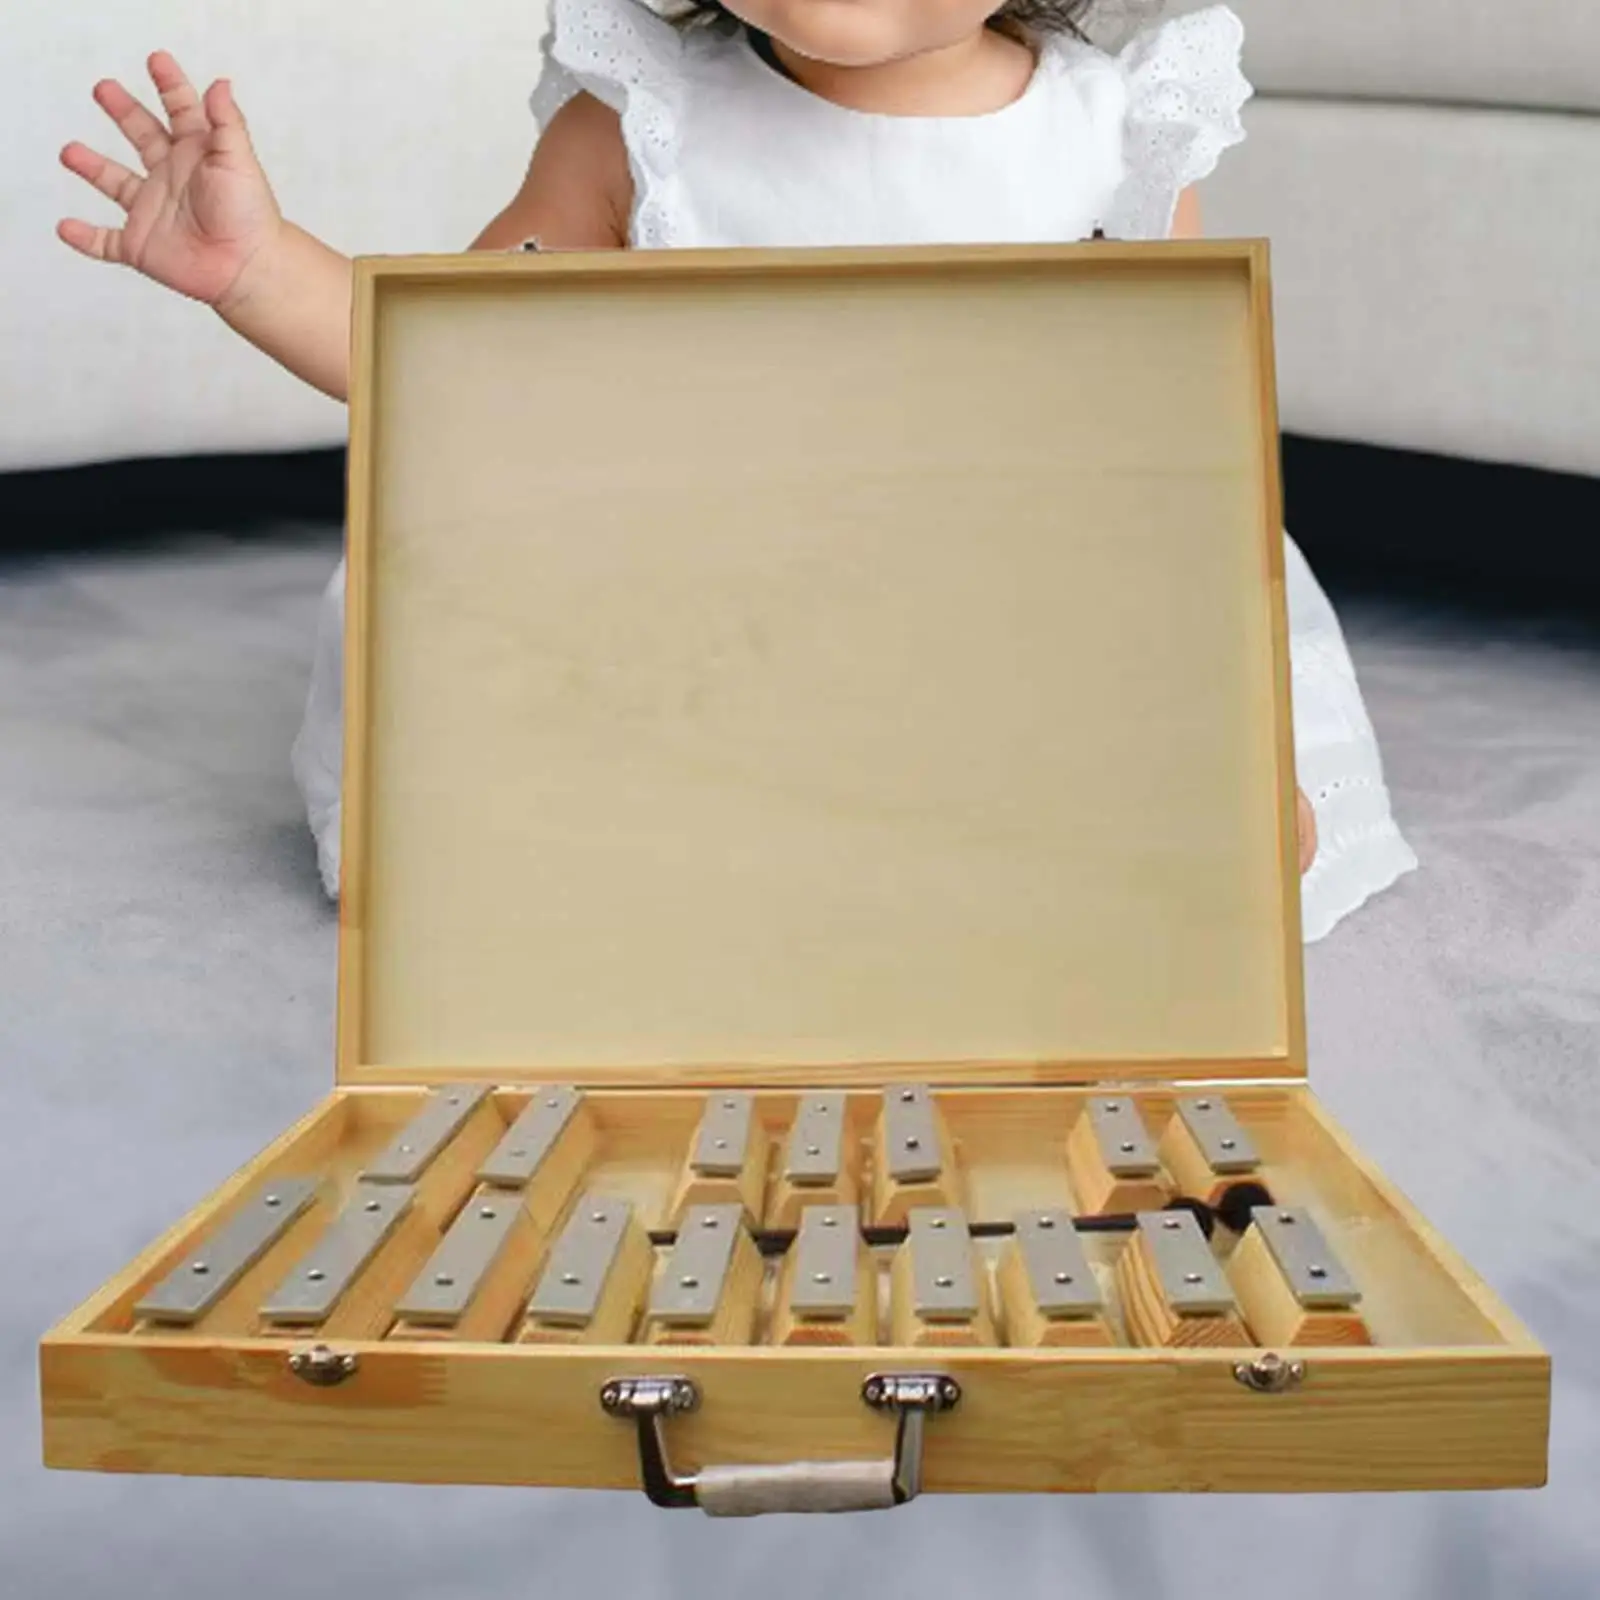 Xylophone for Kids Preschool Learning Musical Toy Wooden Xylophone Toy